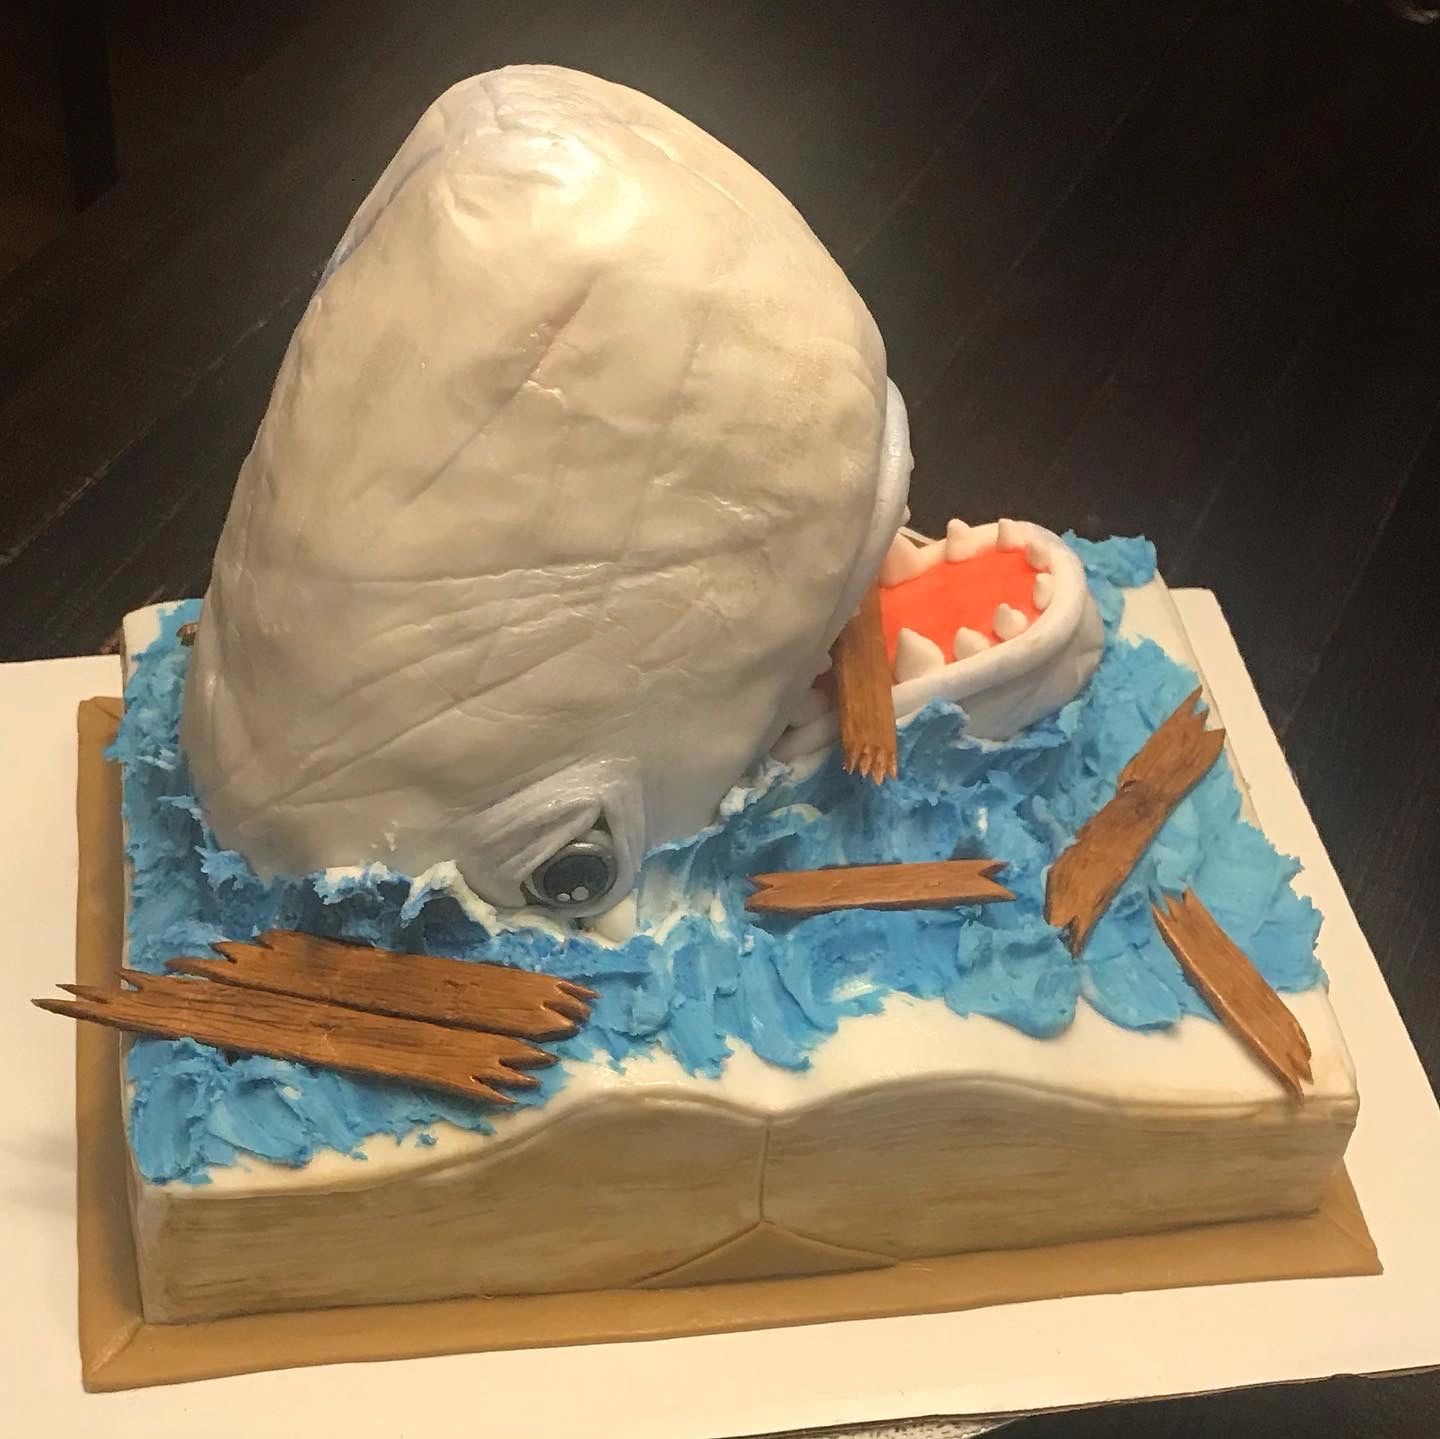 Moby Dick Cake - The White Whale 
Grooms Cakes, Wedding Cakes, Special Events